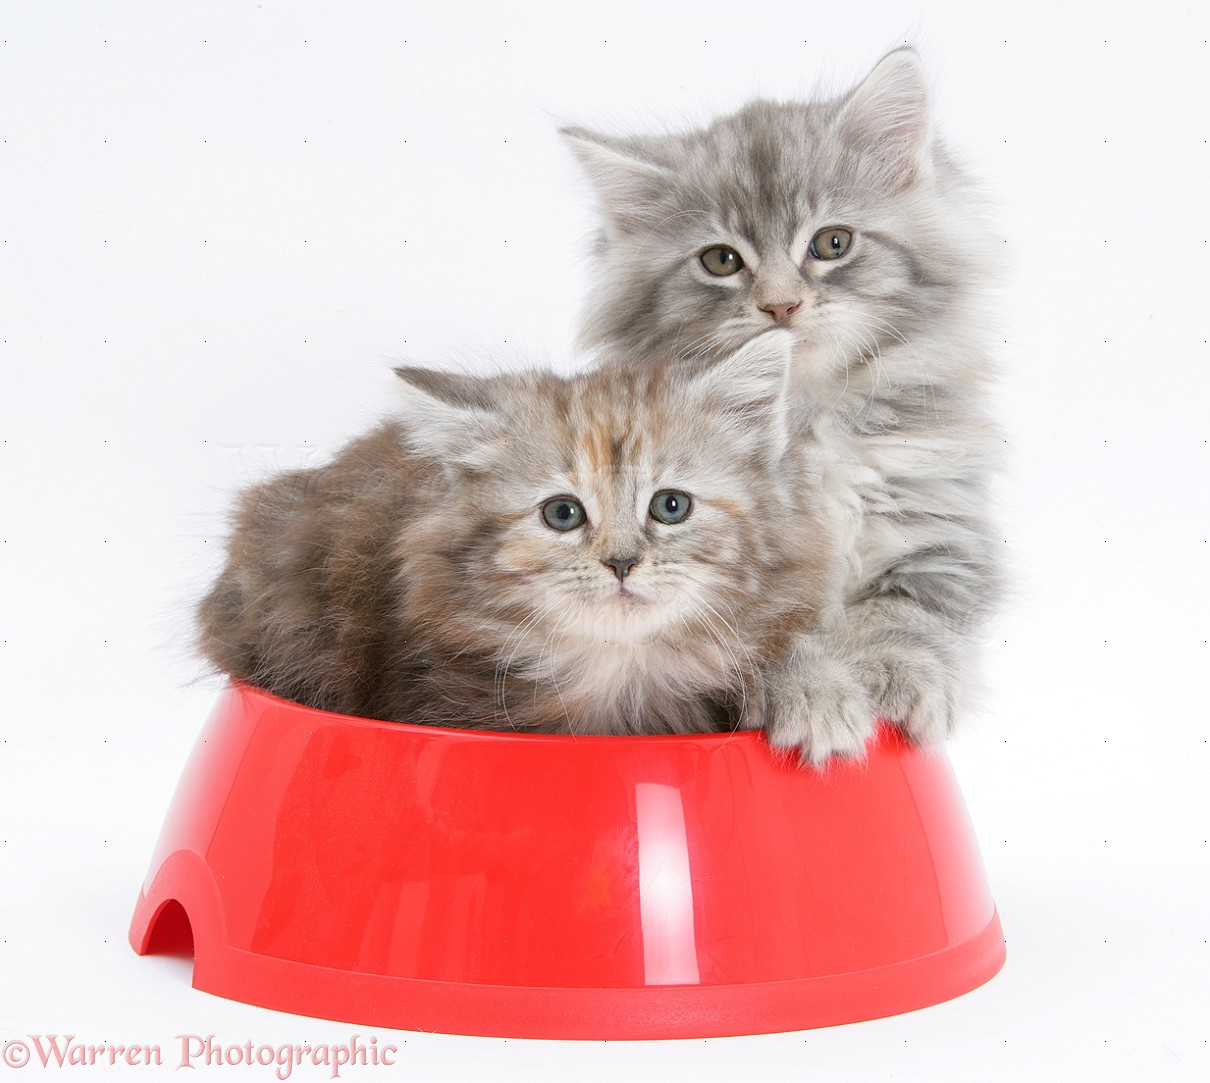 Maine Coon kittens, 8 weeks old, in a plastic food bowl photo WP18705